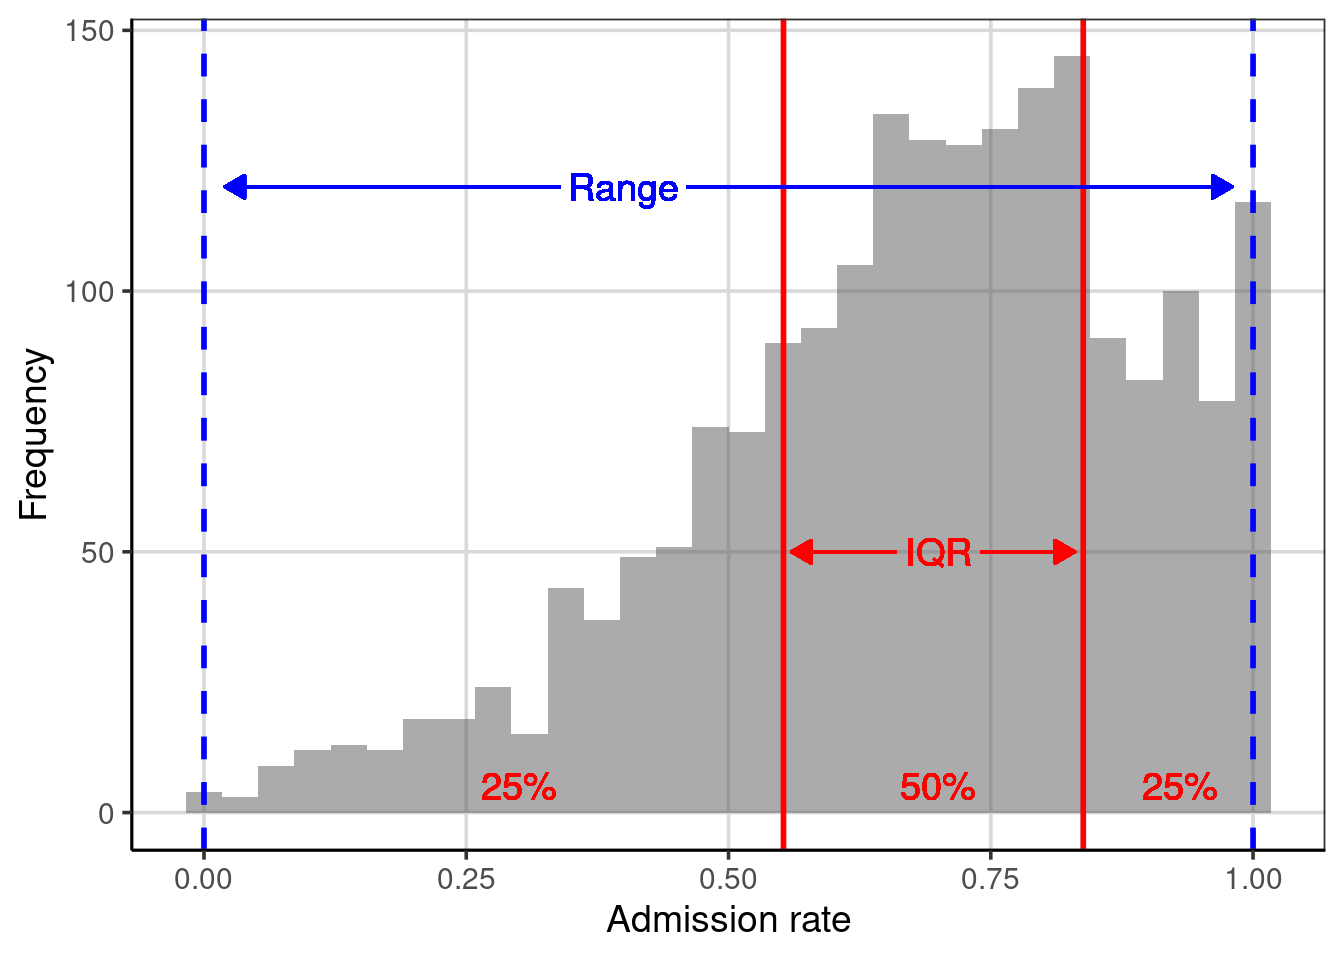 Distribution of the admission rates for 2,019 institutions of higher education. The solid, red lines are placed at the 25th and 75th percentiles, respectively. The dashed, blue lines are placed at the minimum and maximum values, respectively.